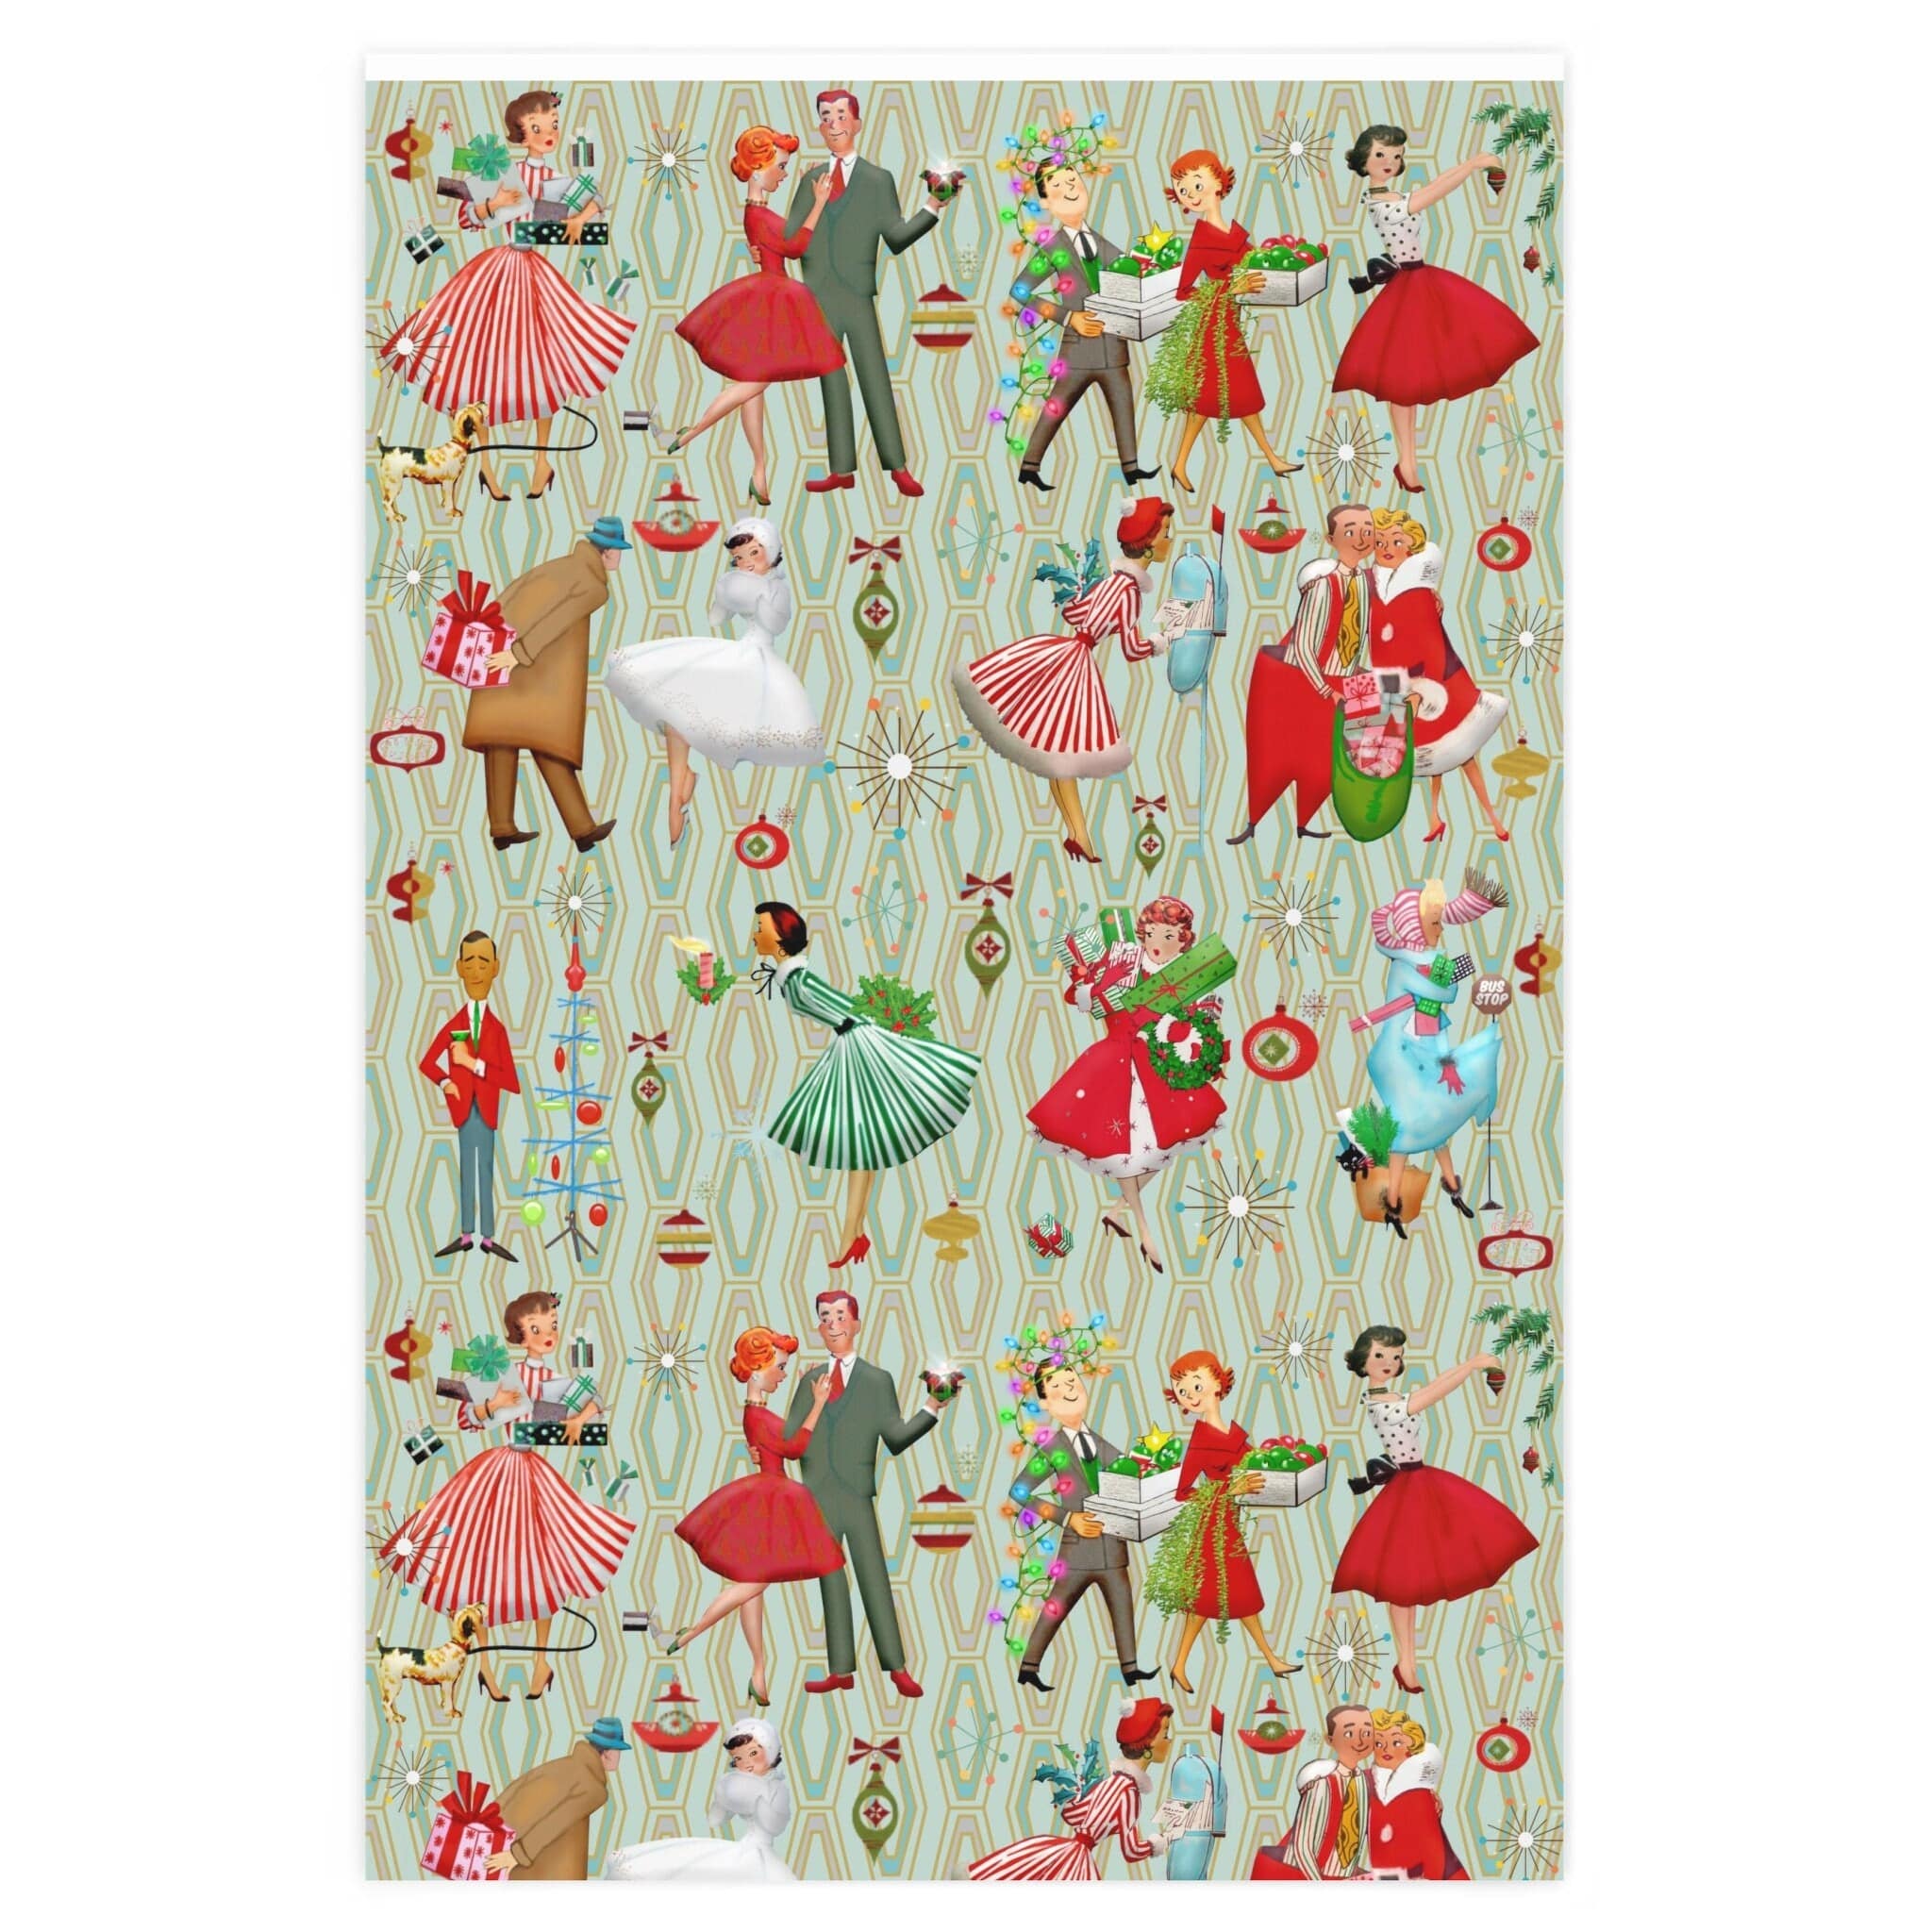 Kate McEnroe New York 1950s Retro Vintage Christmas Wrapping Paper, Mid Century Modern Retro Green, Red, Women, Ladies, Housewives Holiday Gift WrapWrapping Paper23361752366874107488